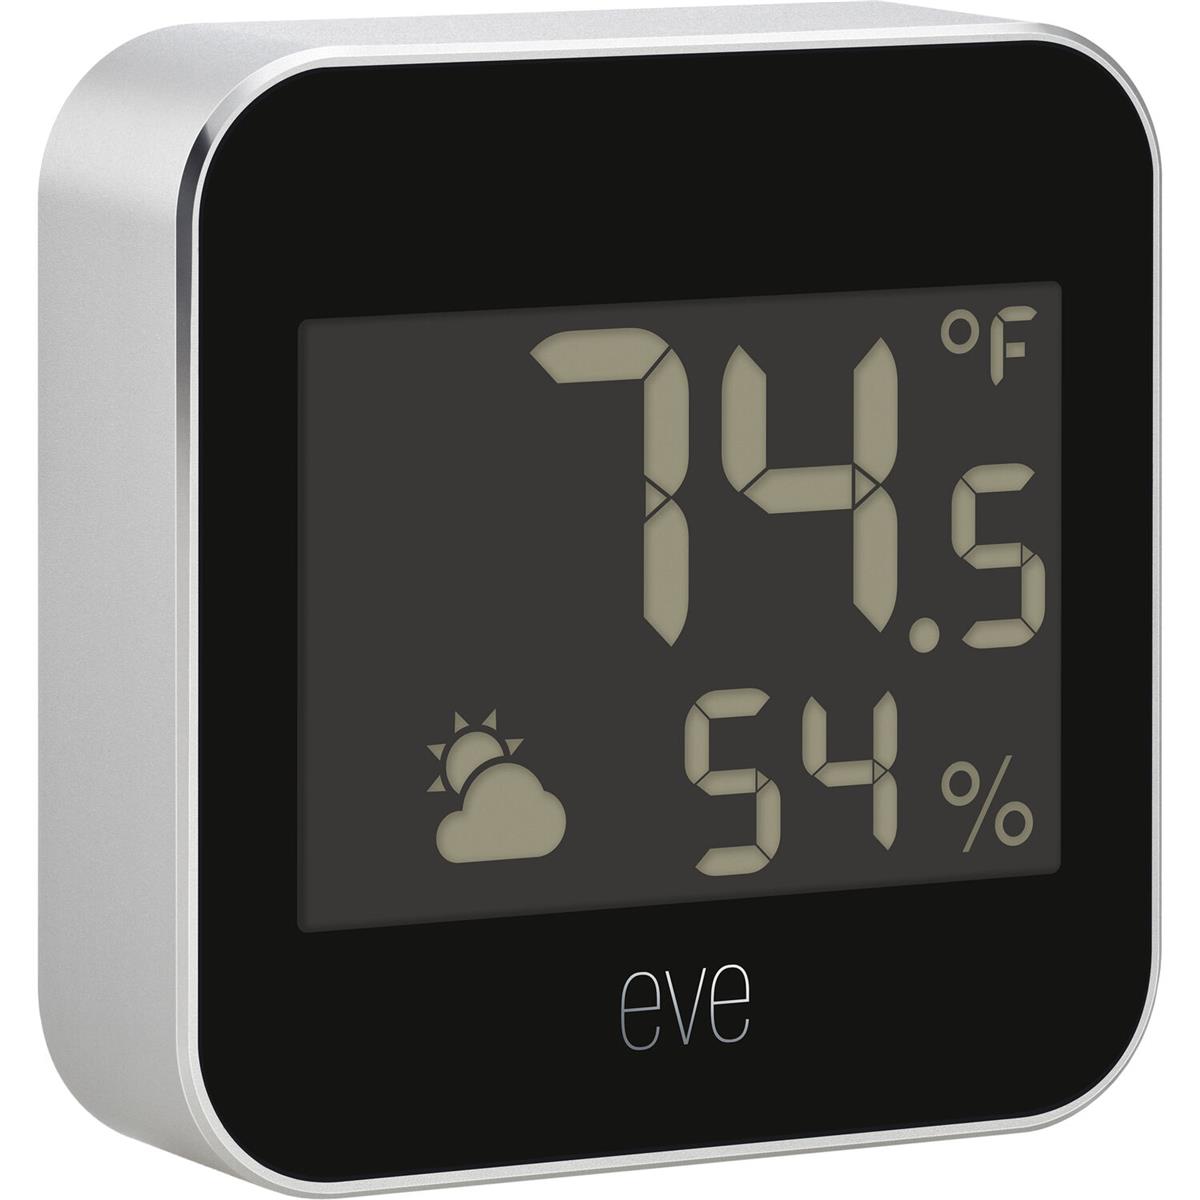 Image of Eve Weather Station with Apple Homekit Technology